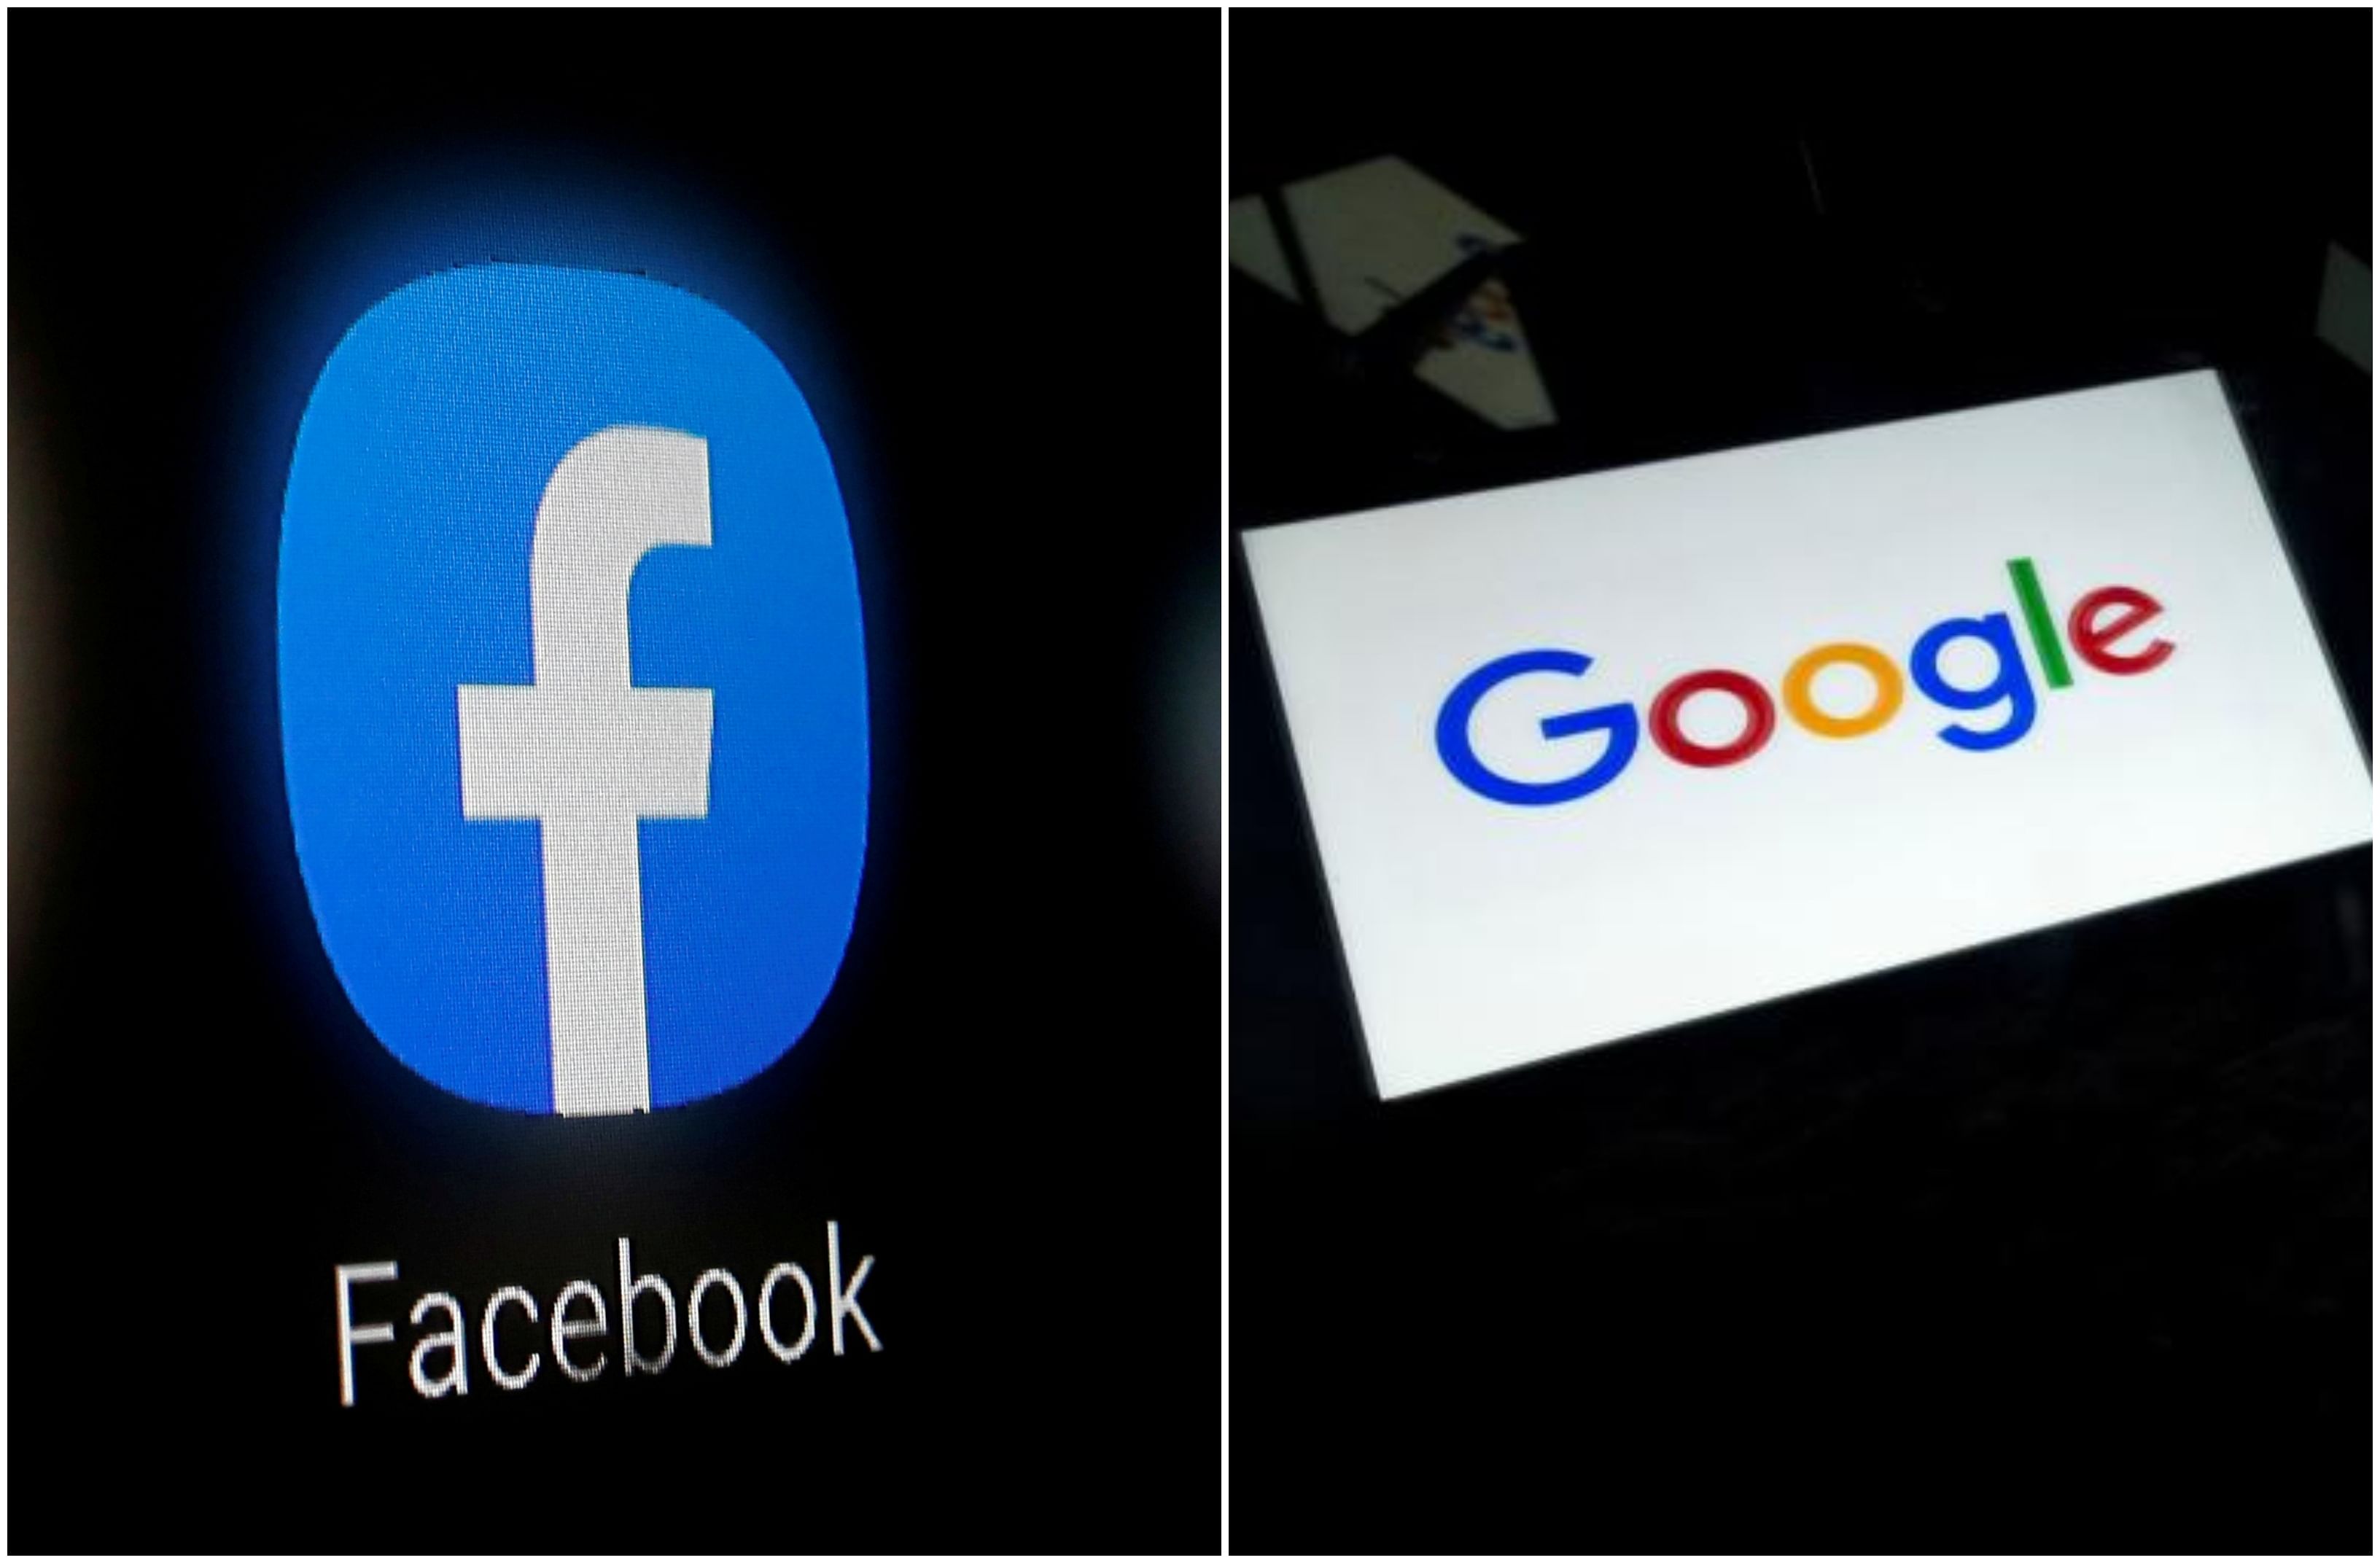 Facebook and Google are in talks with Washington over potentially using individuals' personal data to track and combat the coronavirus outbreak, US media reported.